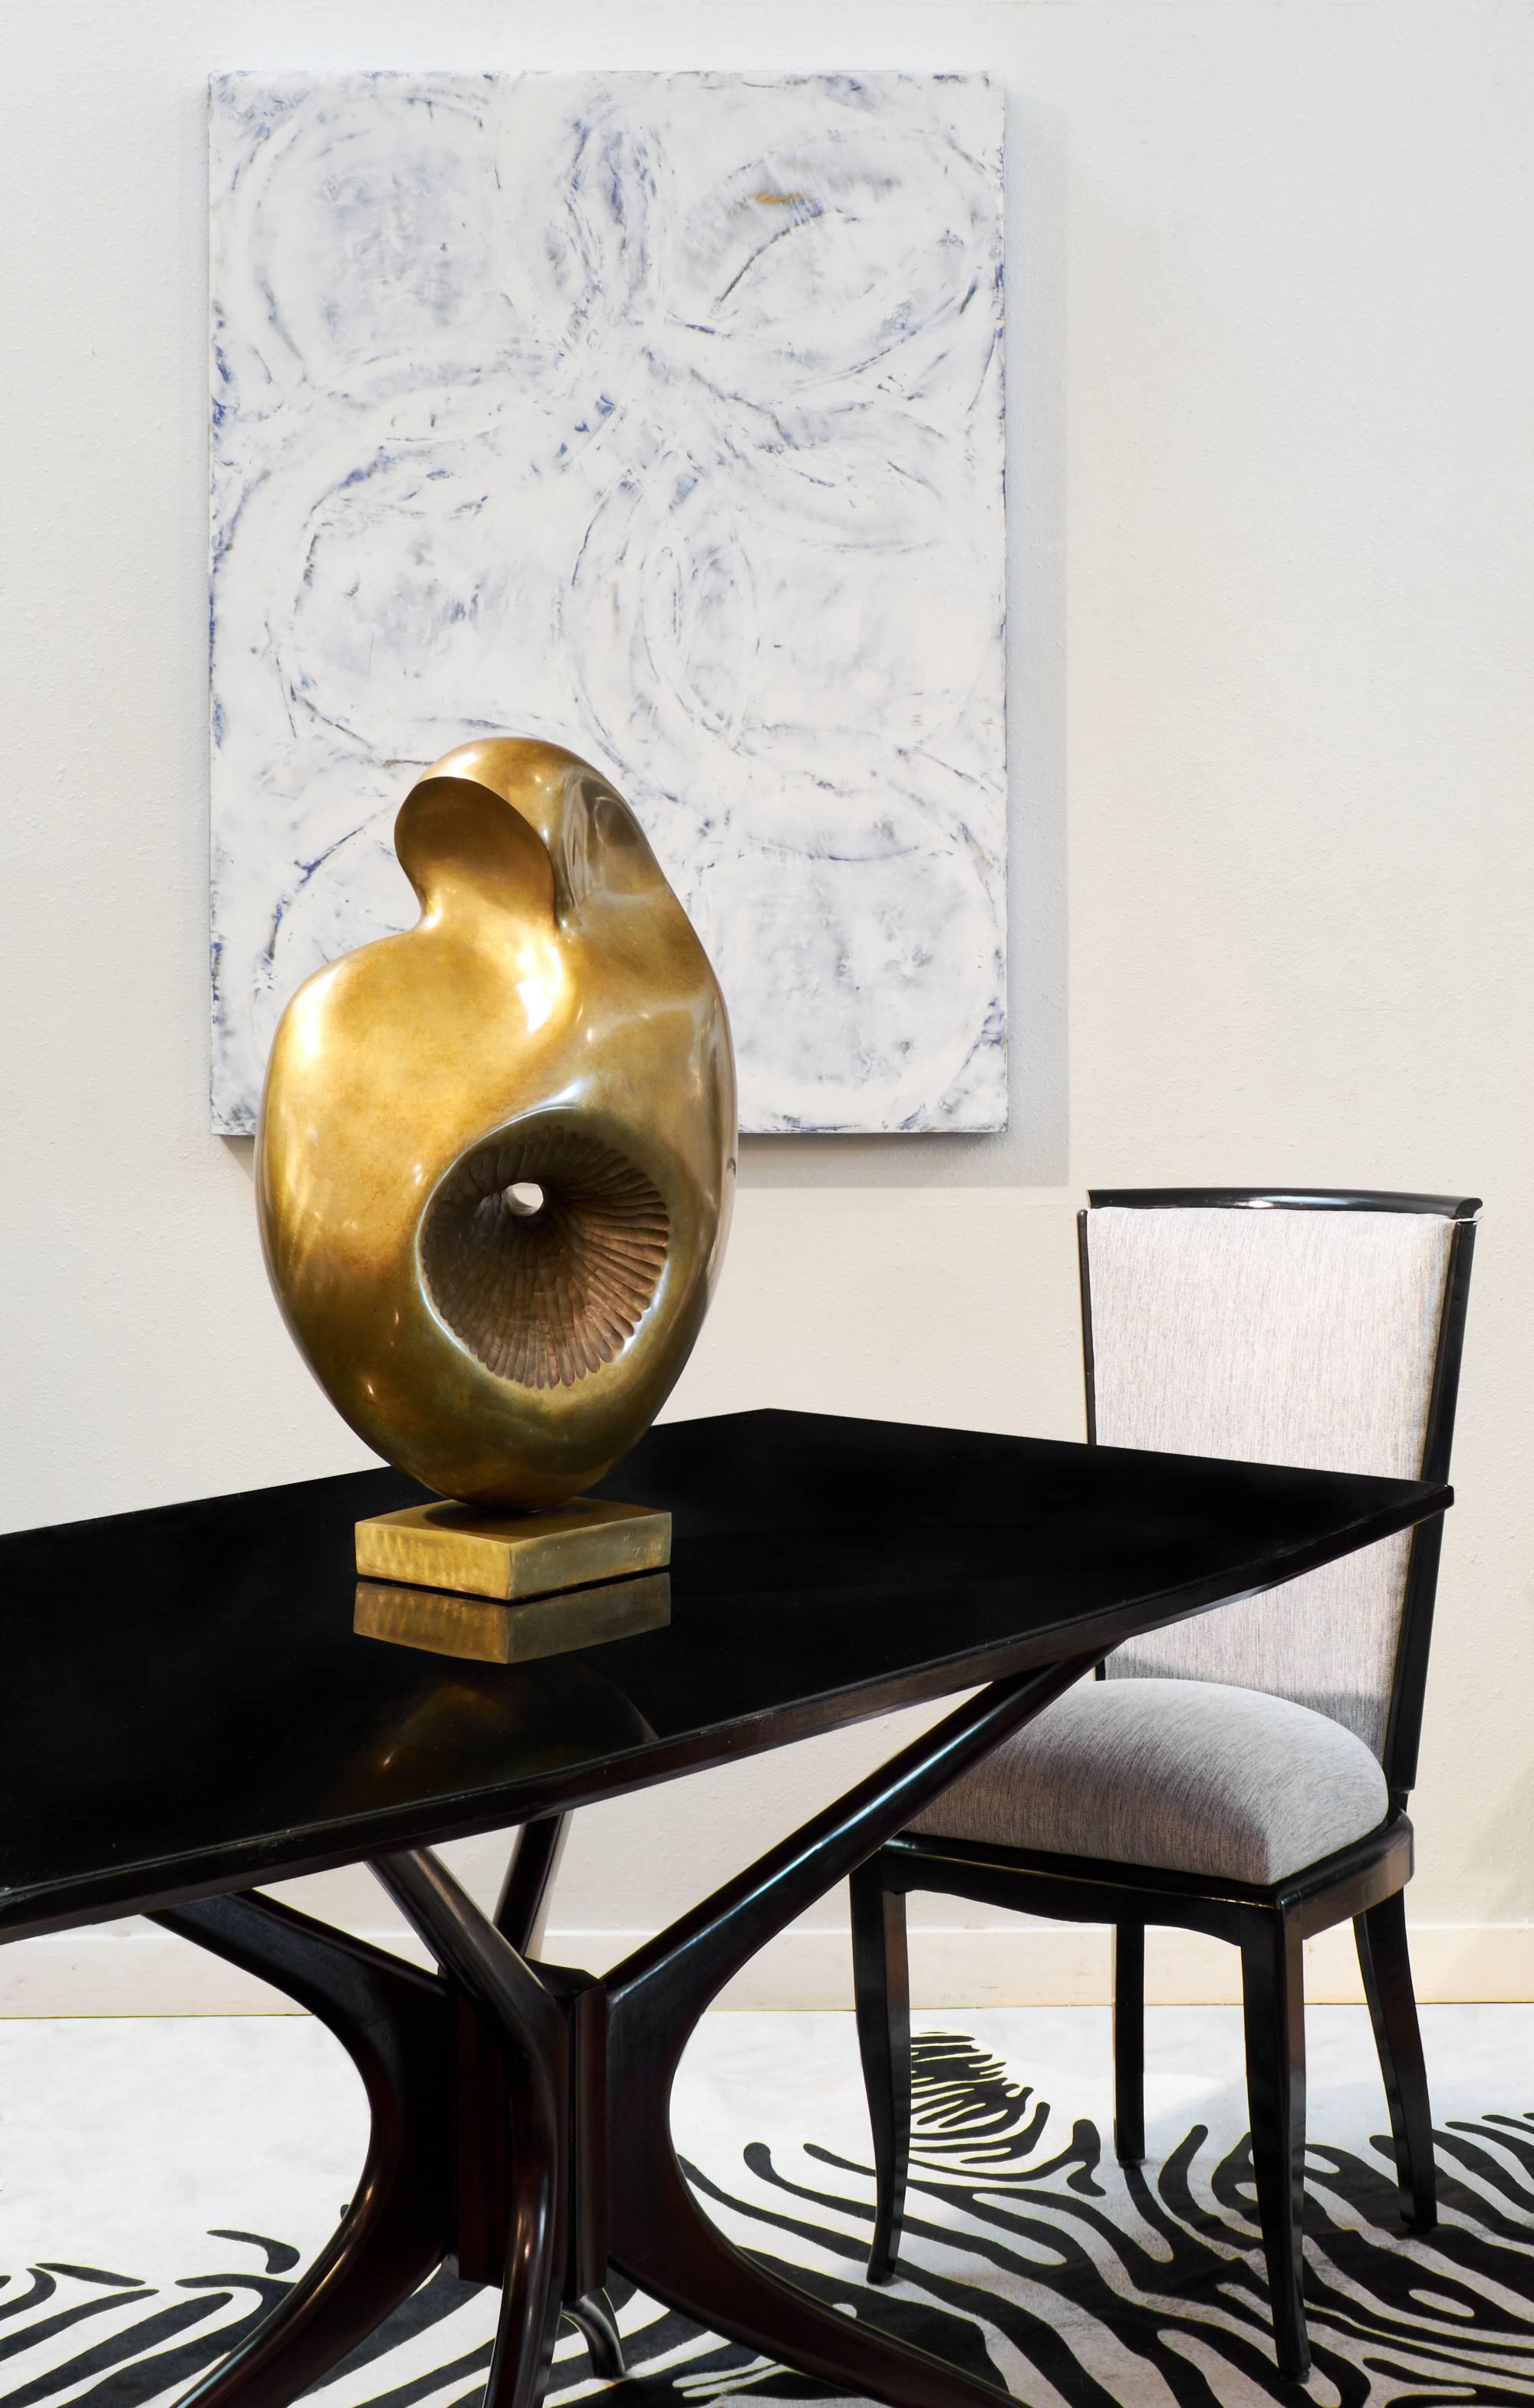 “Demeter” bronze 1/19 by Barbara Serota 1/19.
 Barbara whose work as a sculptor was greatly influenced by Barbara Hepworth, the English sculptor ( 1903-1975 ) is telling us about about her life as an artist and the time when Demeter was